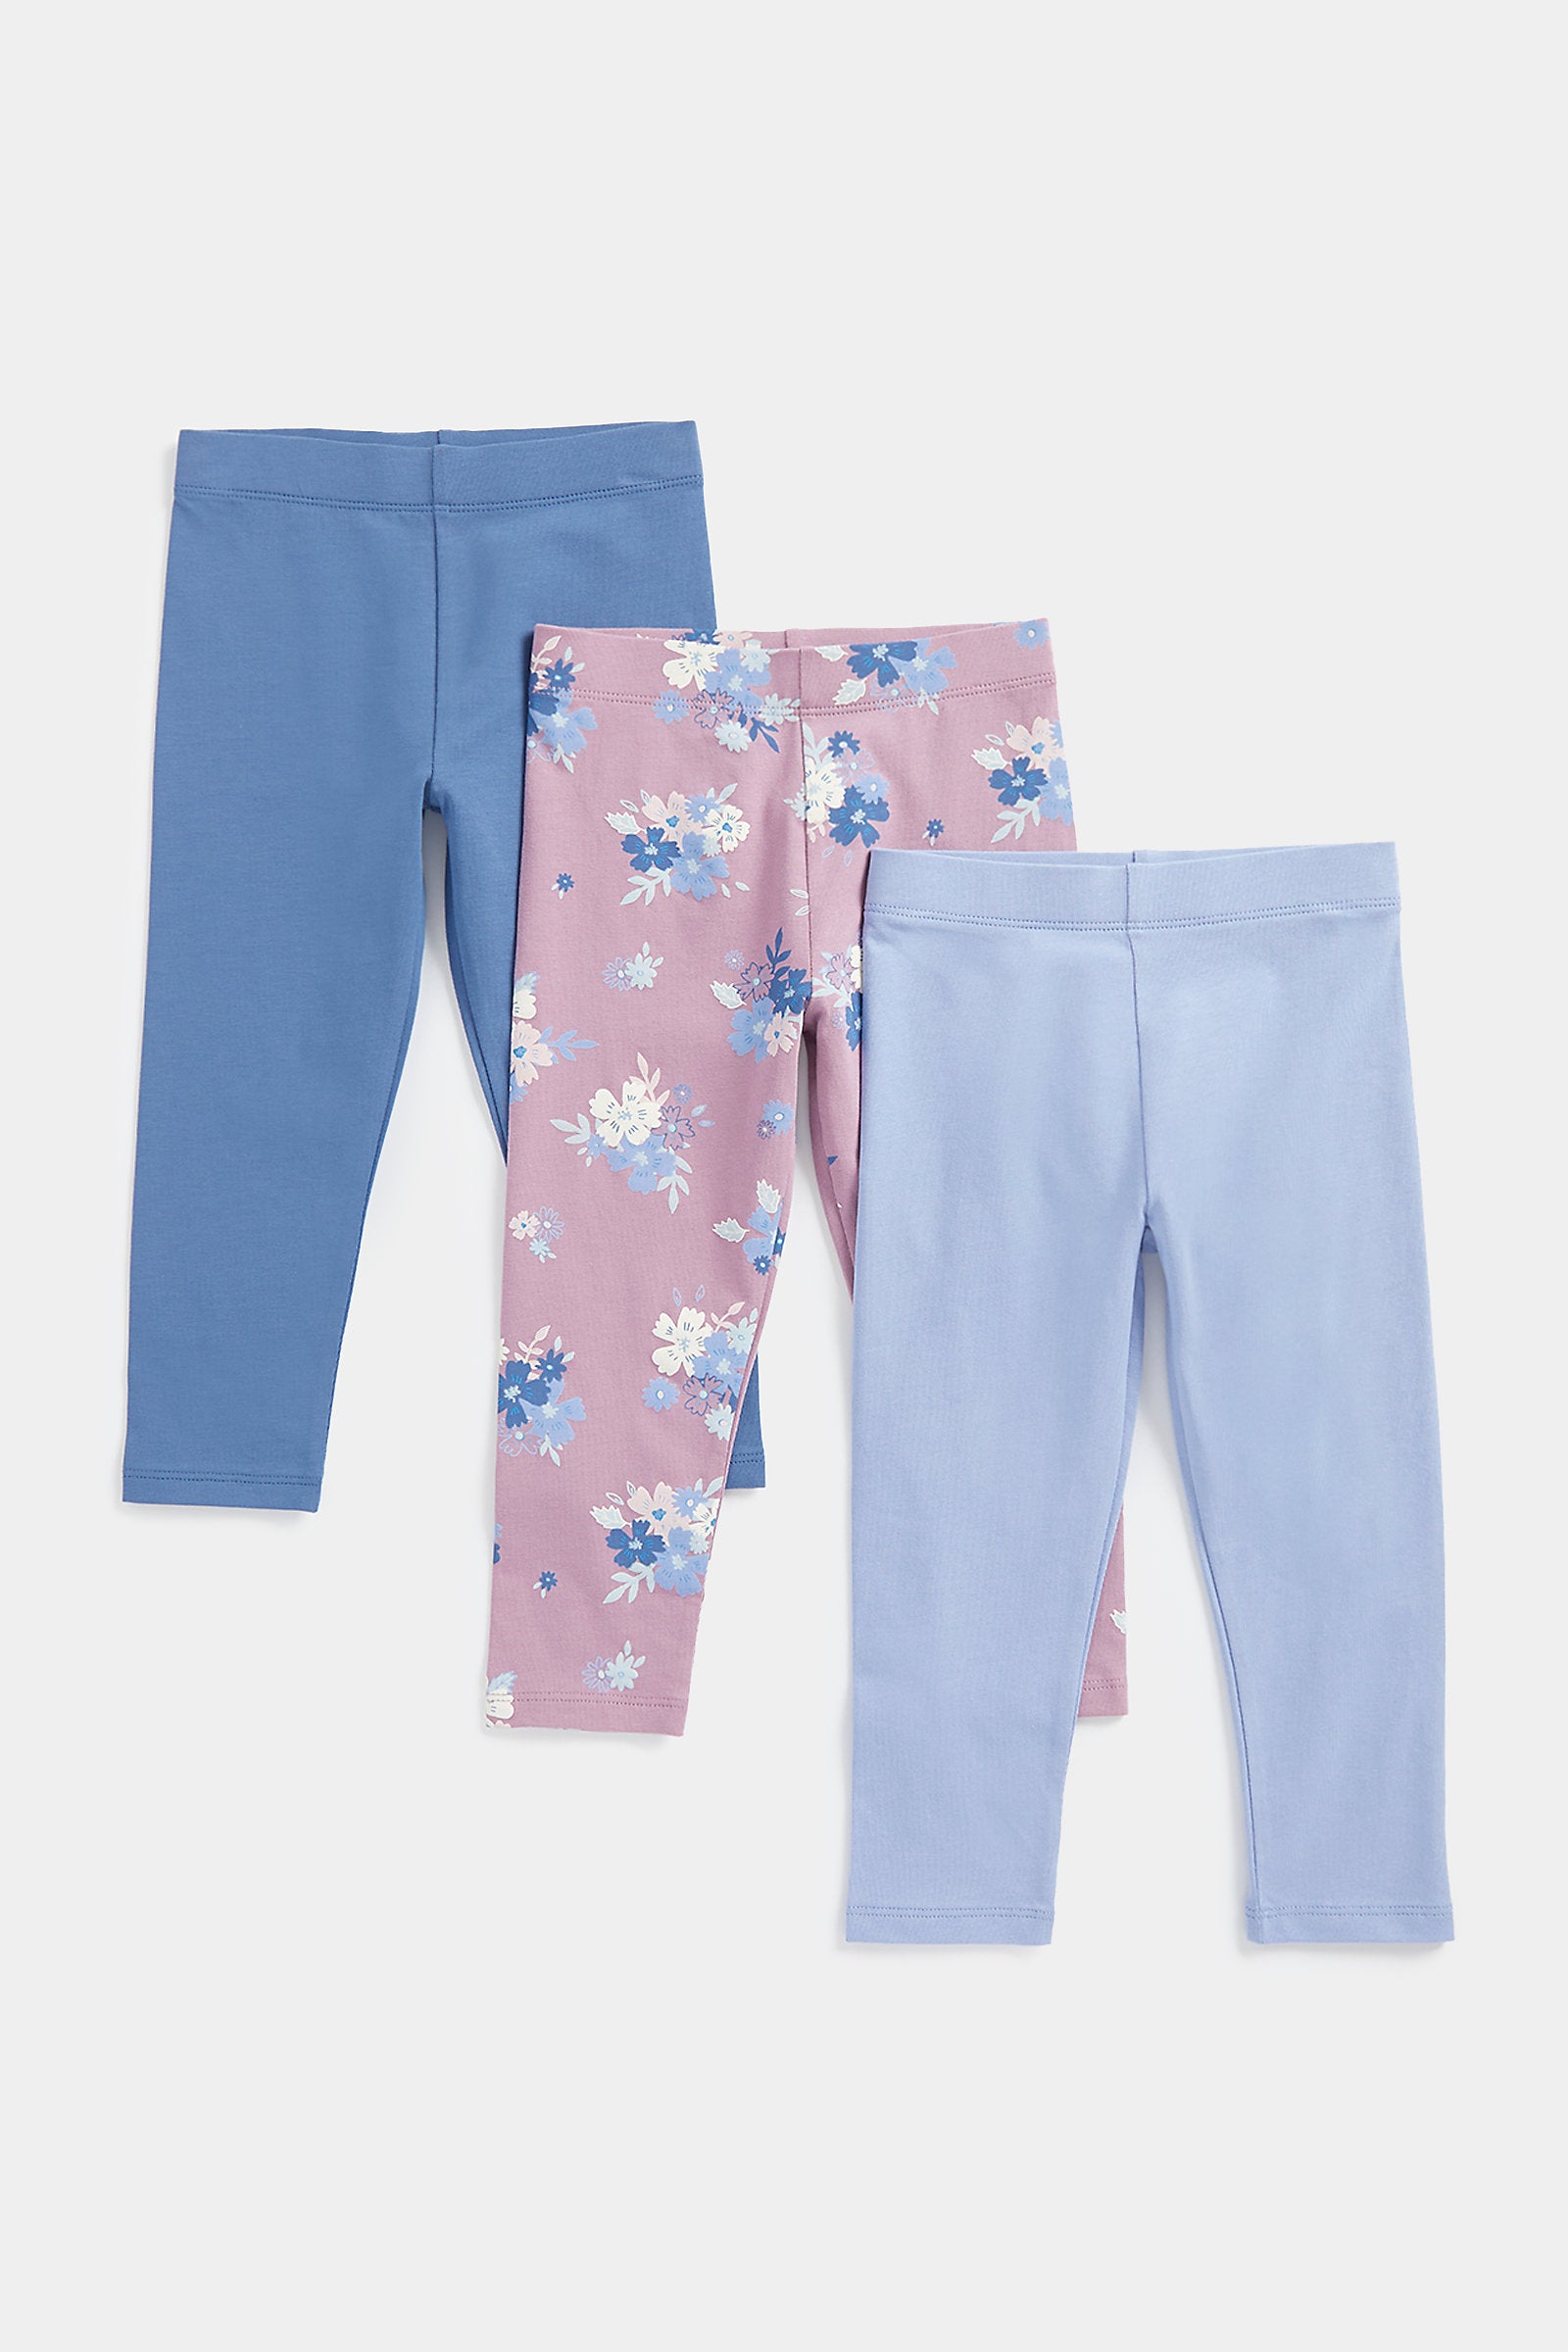 Mothercare Blue and Floral Leggings - 3 Pack